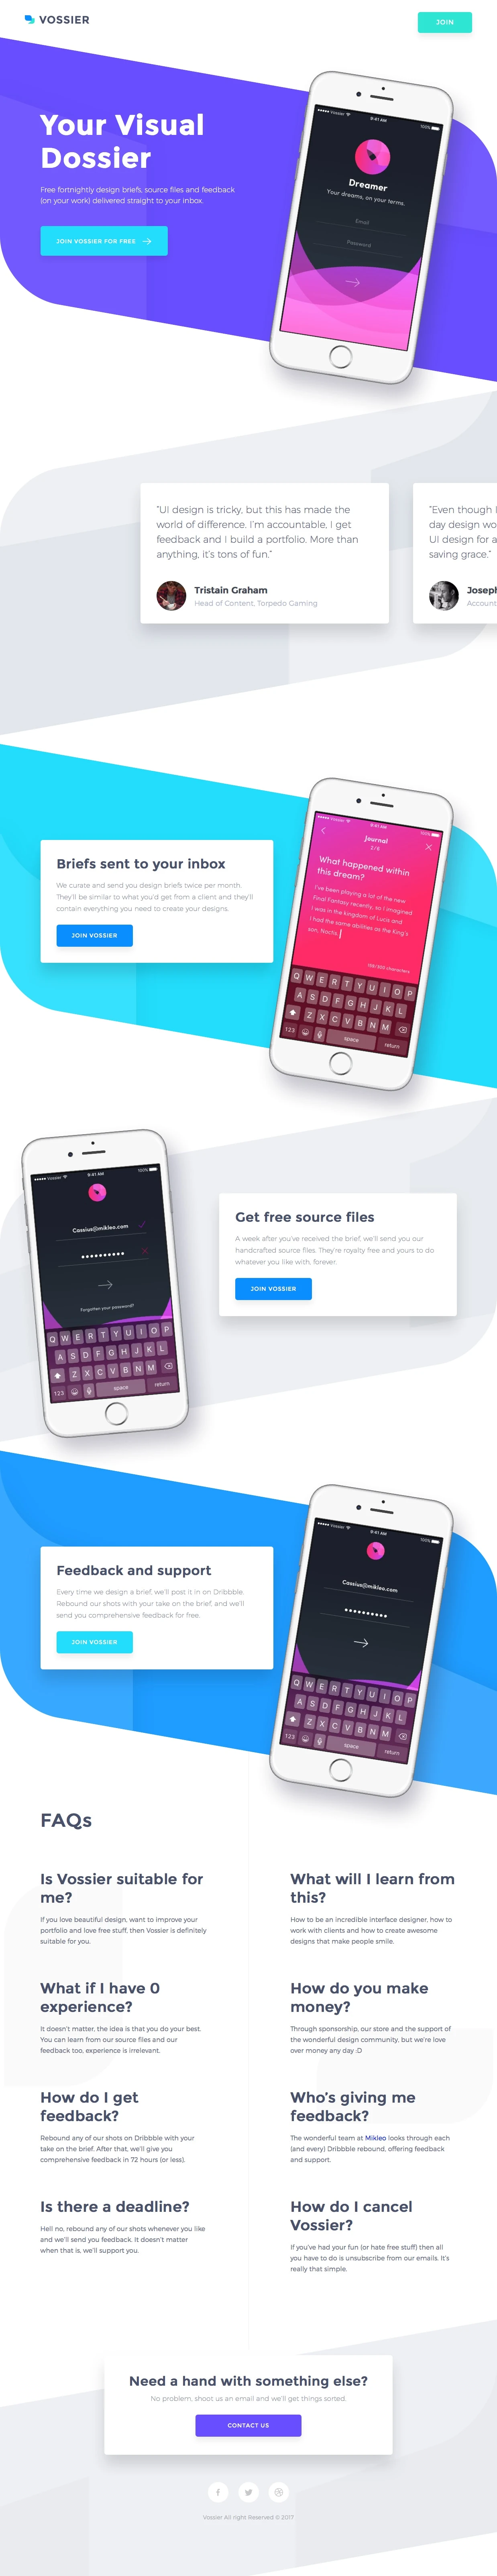 Vossier Landing Page Example: Free fortnightly design briefs, source files and feedback (on your work) delivered straight to your inbox.